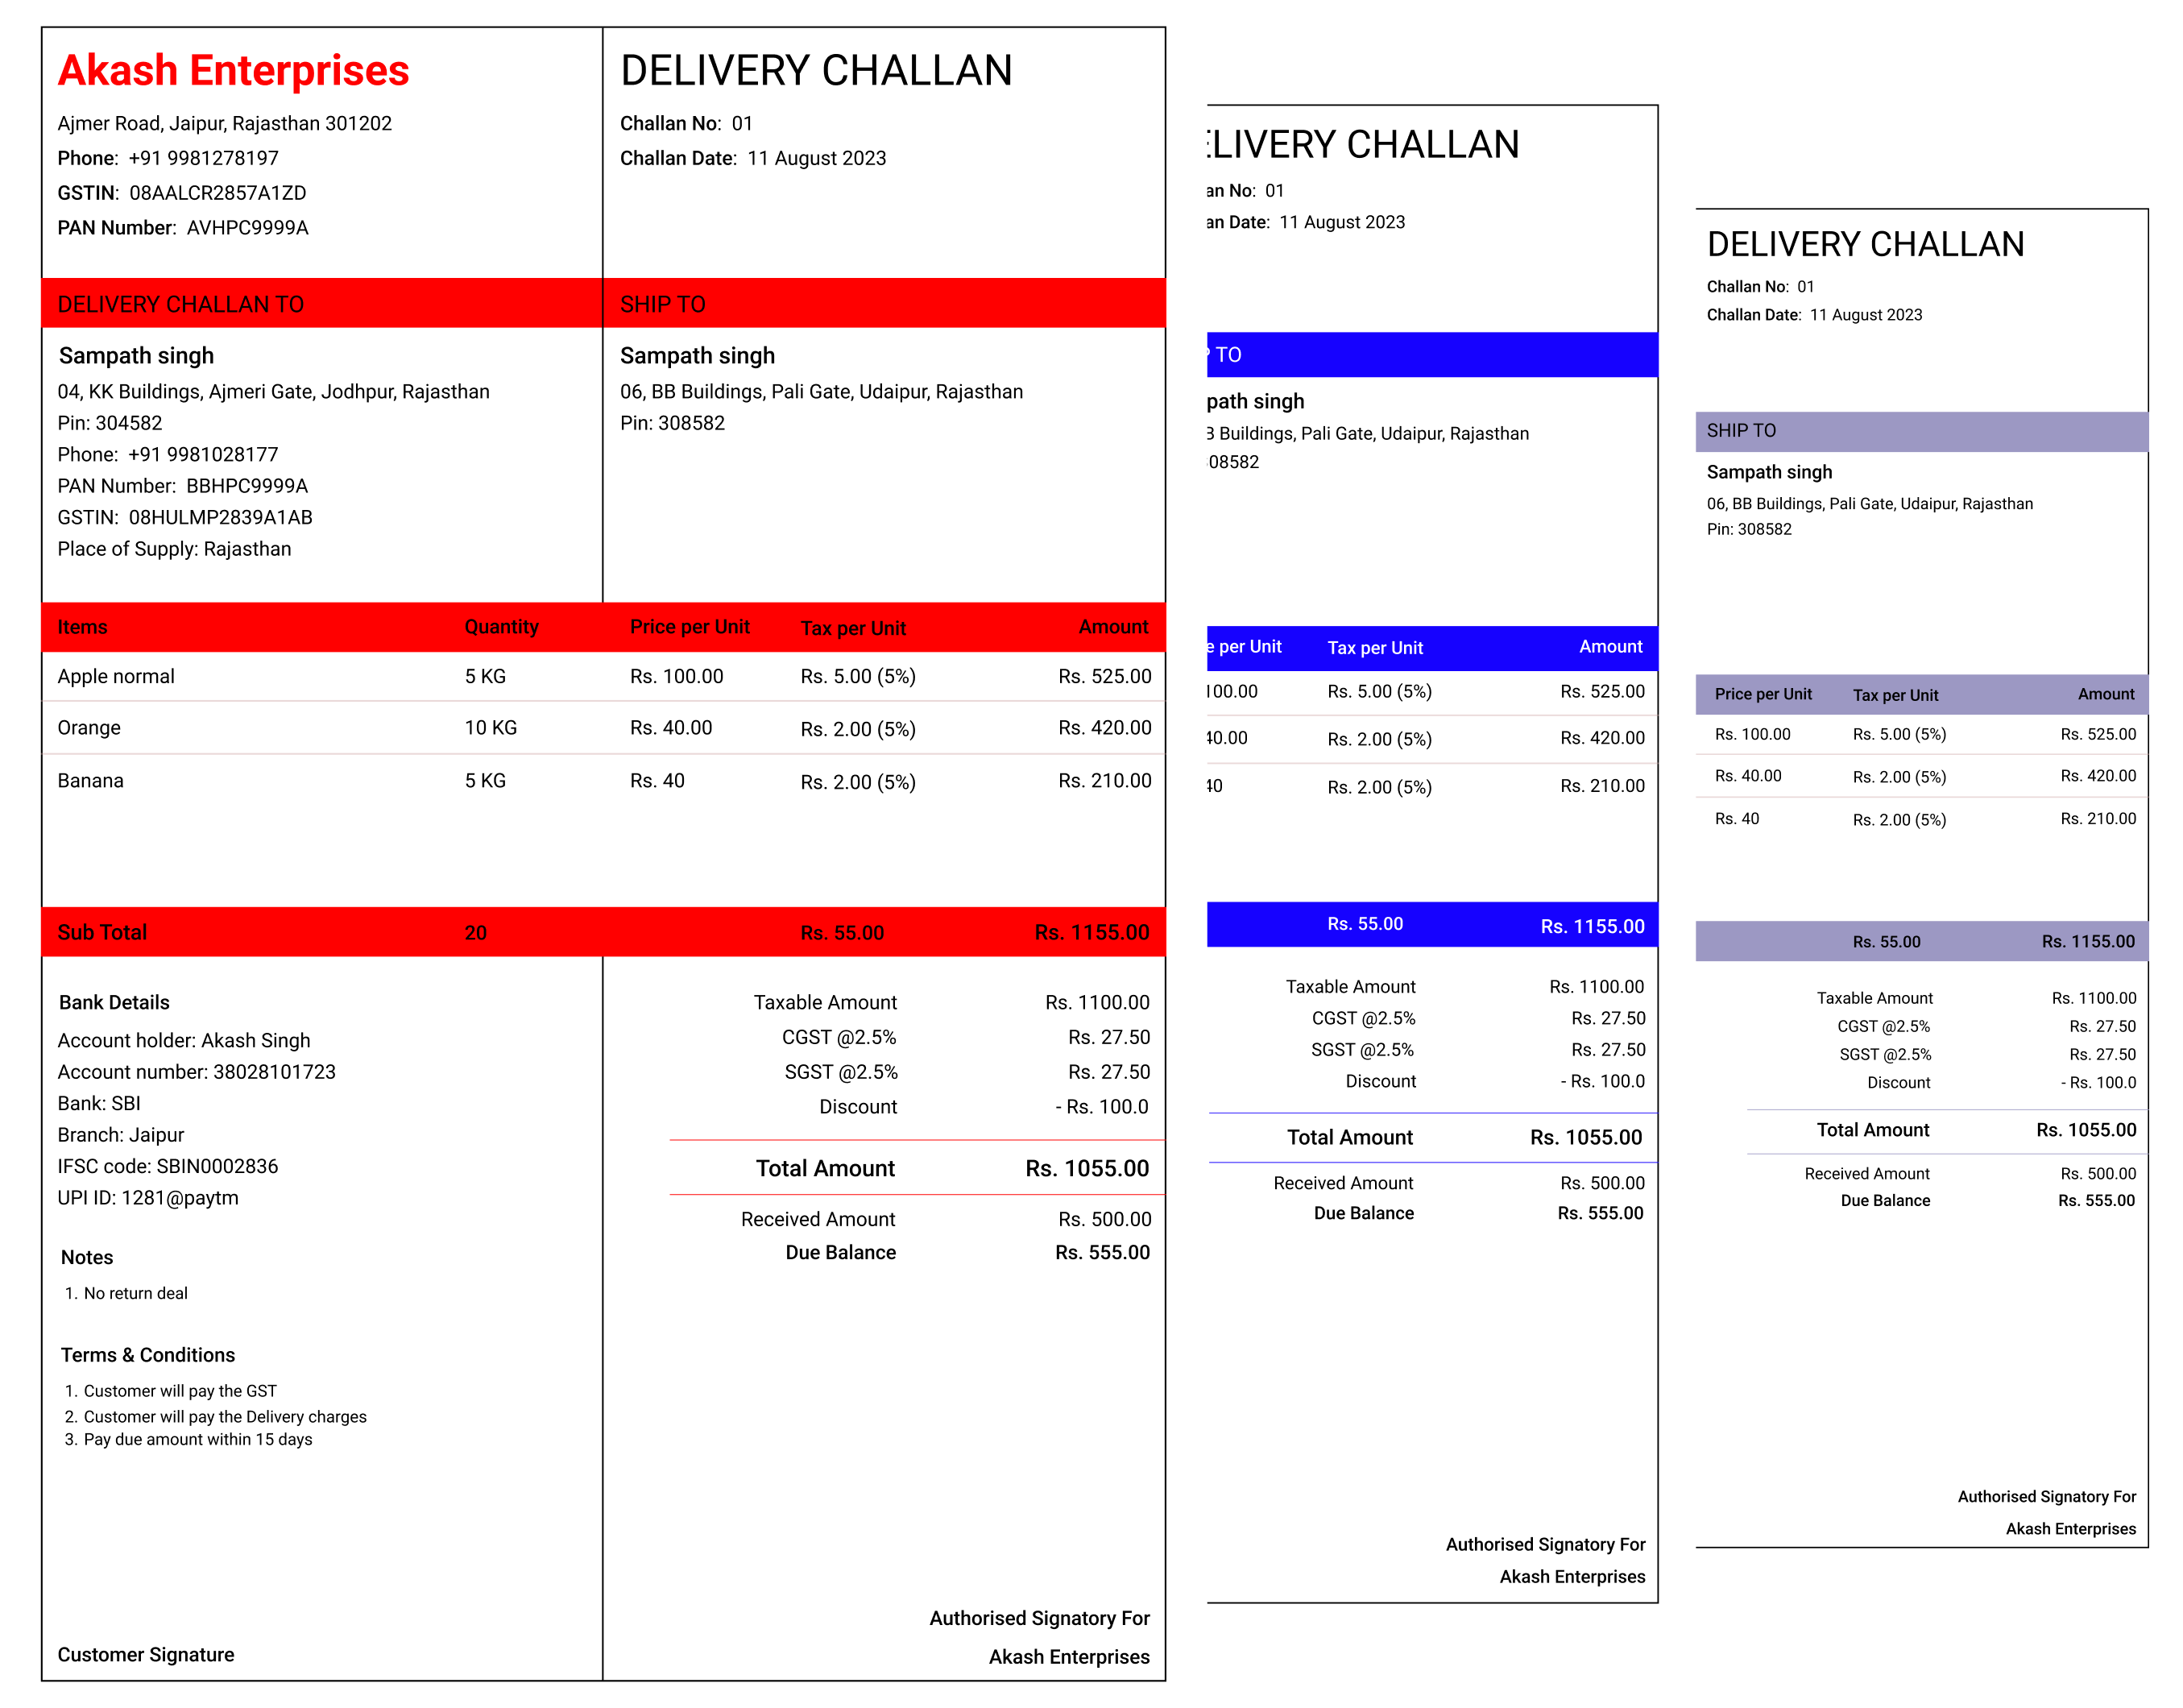 Free Delivery Challan templates for small business to create professional Delivery Challan